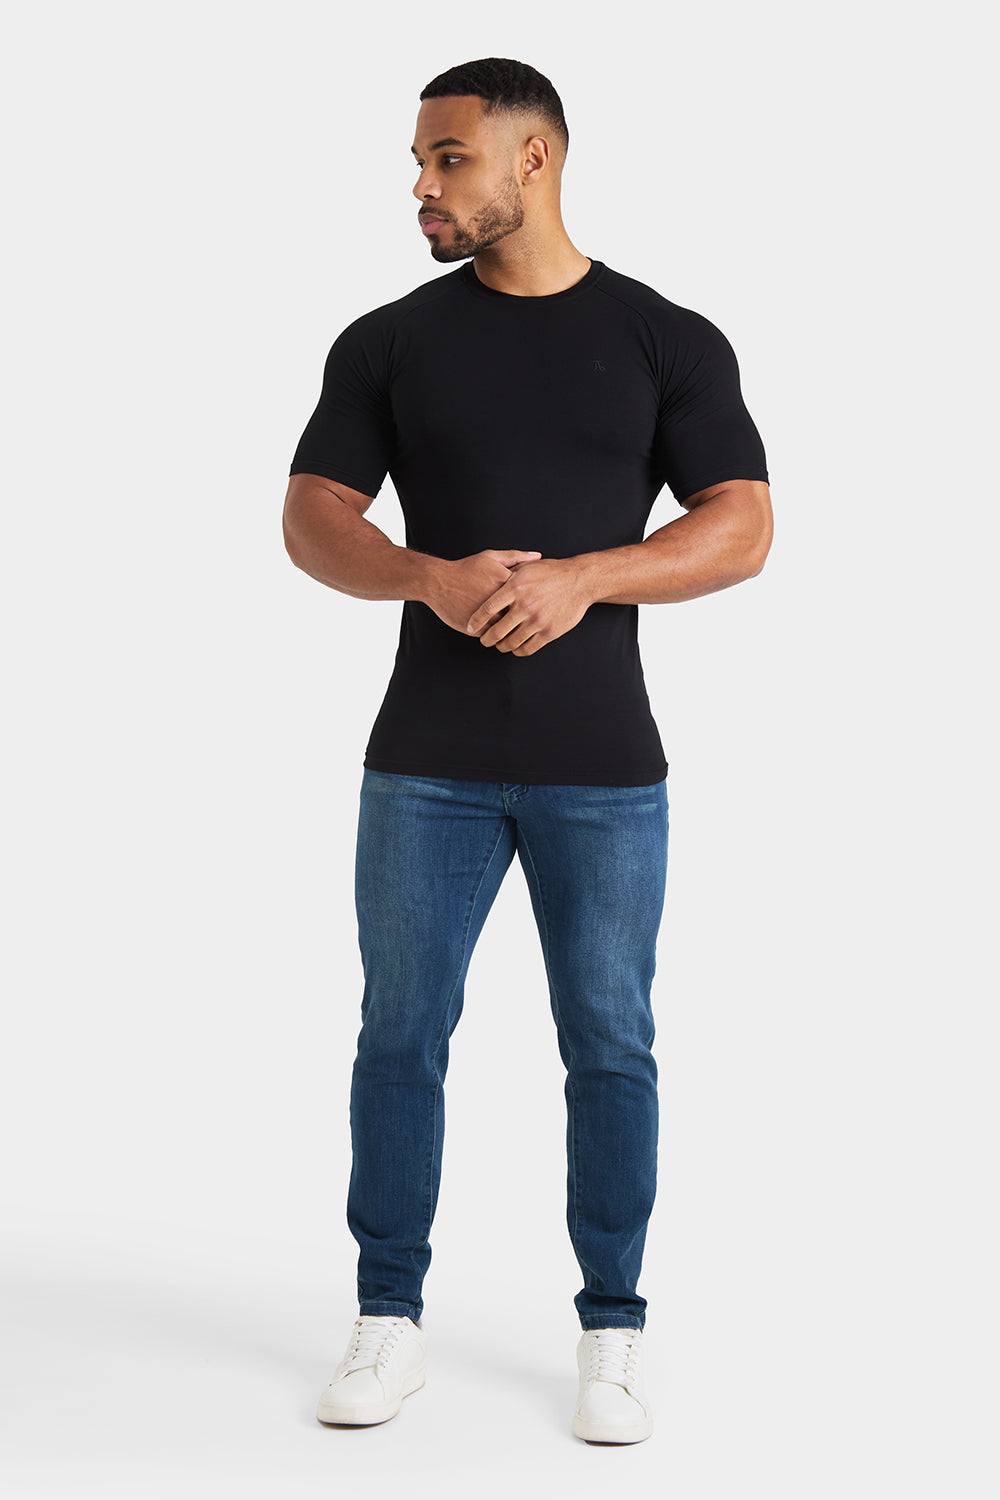 Longer Sleeve Muscle Fit T-Shirt in Black - TAILORED ATHLETE - ROW